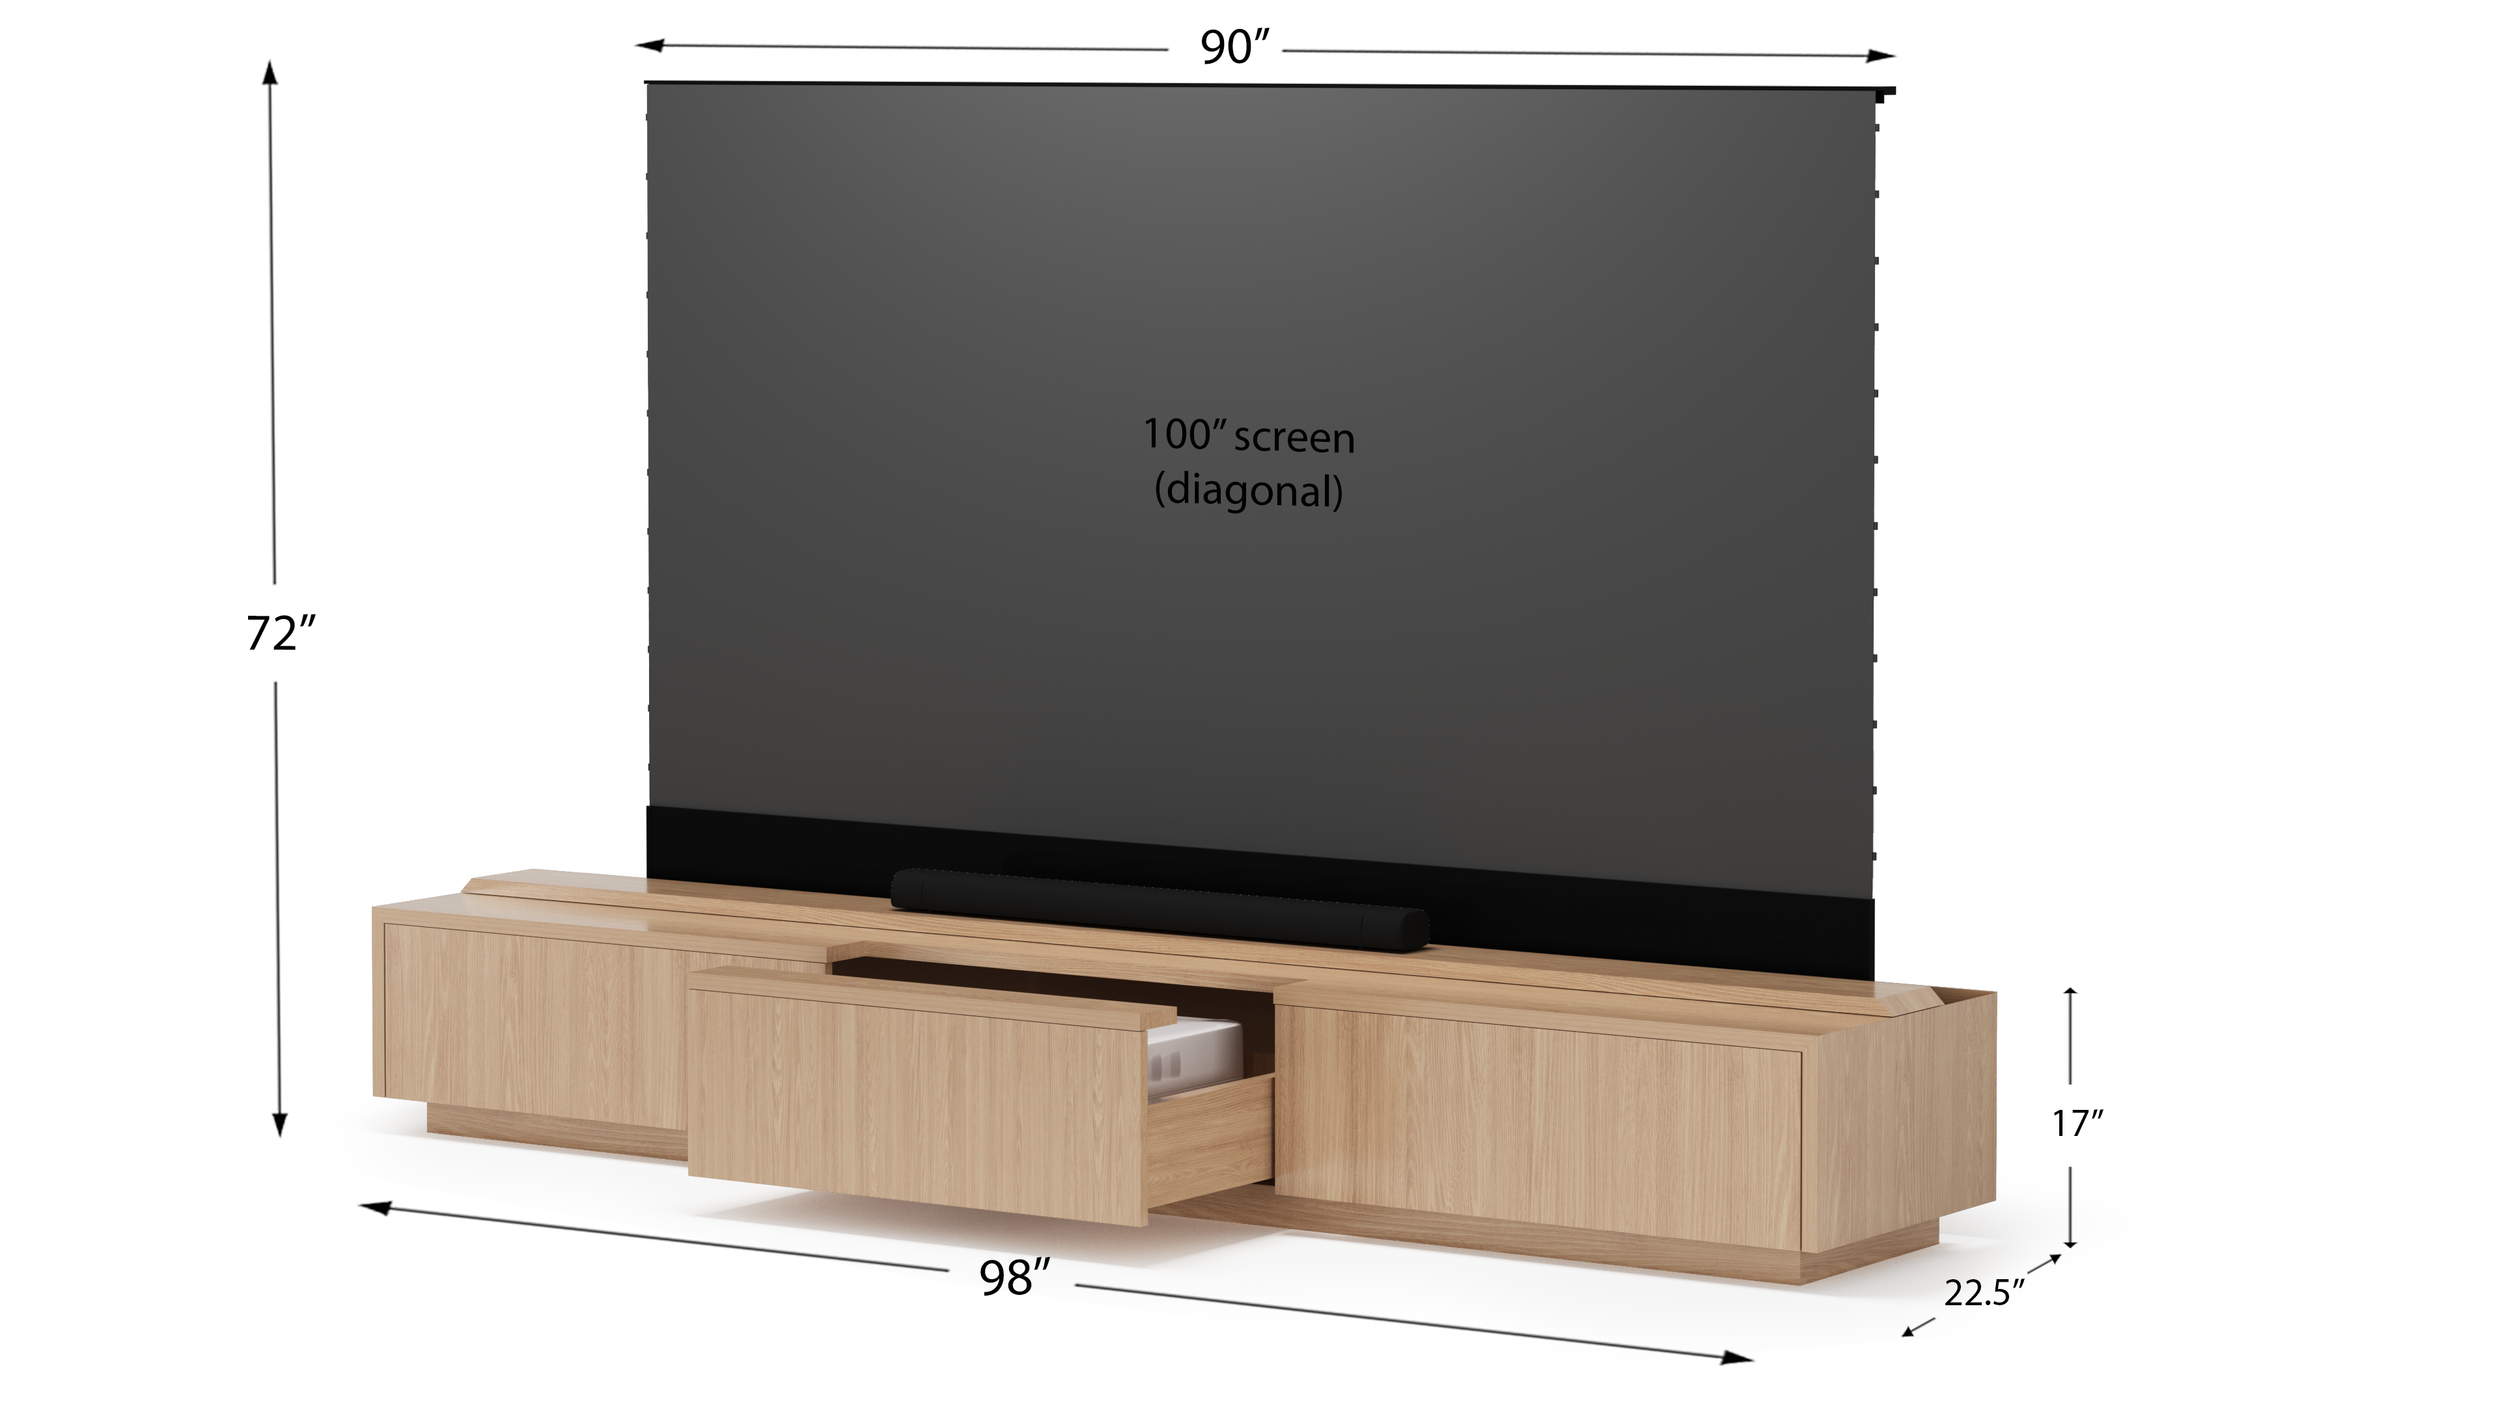 Render Dimensions 100 inch screen (3).png